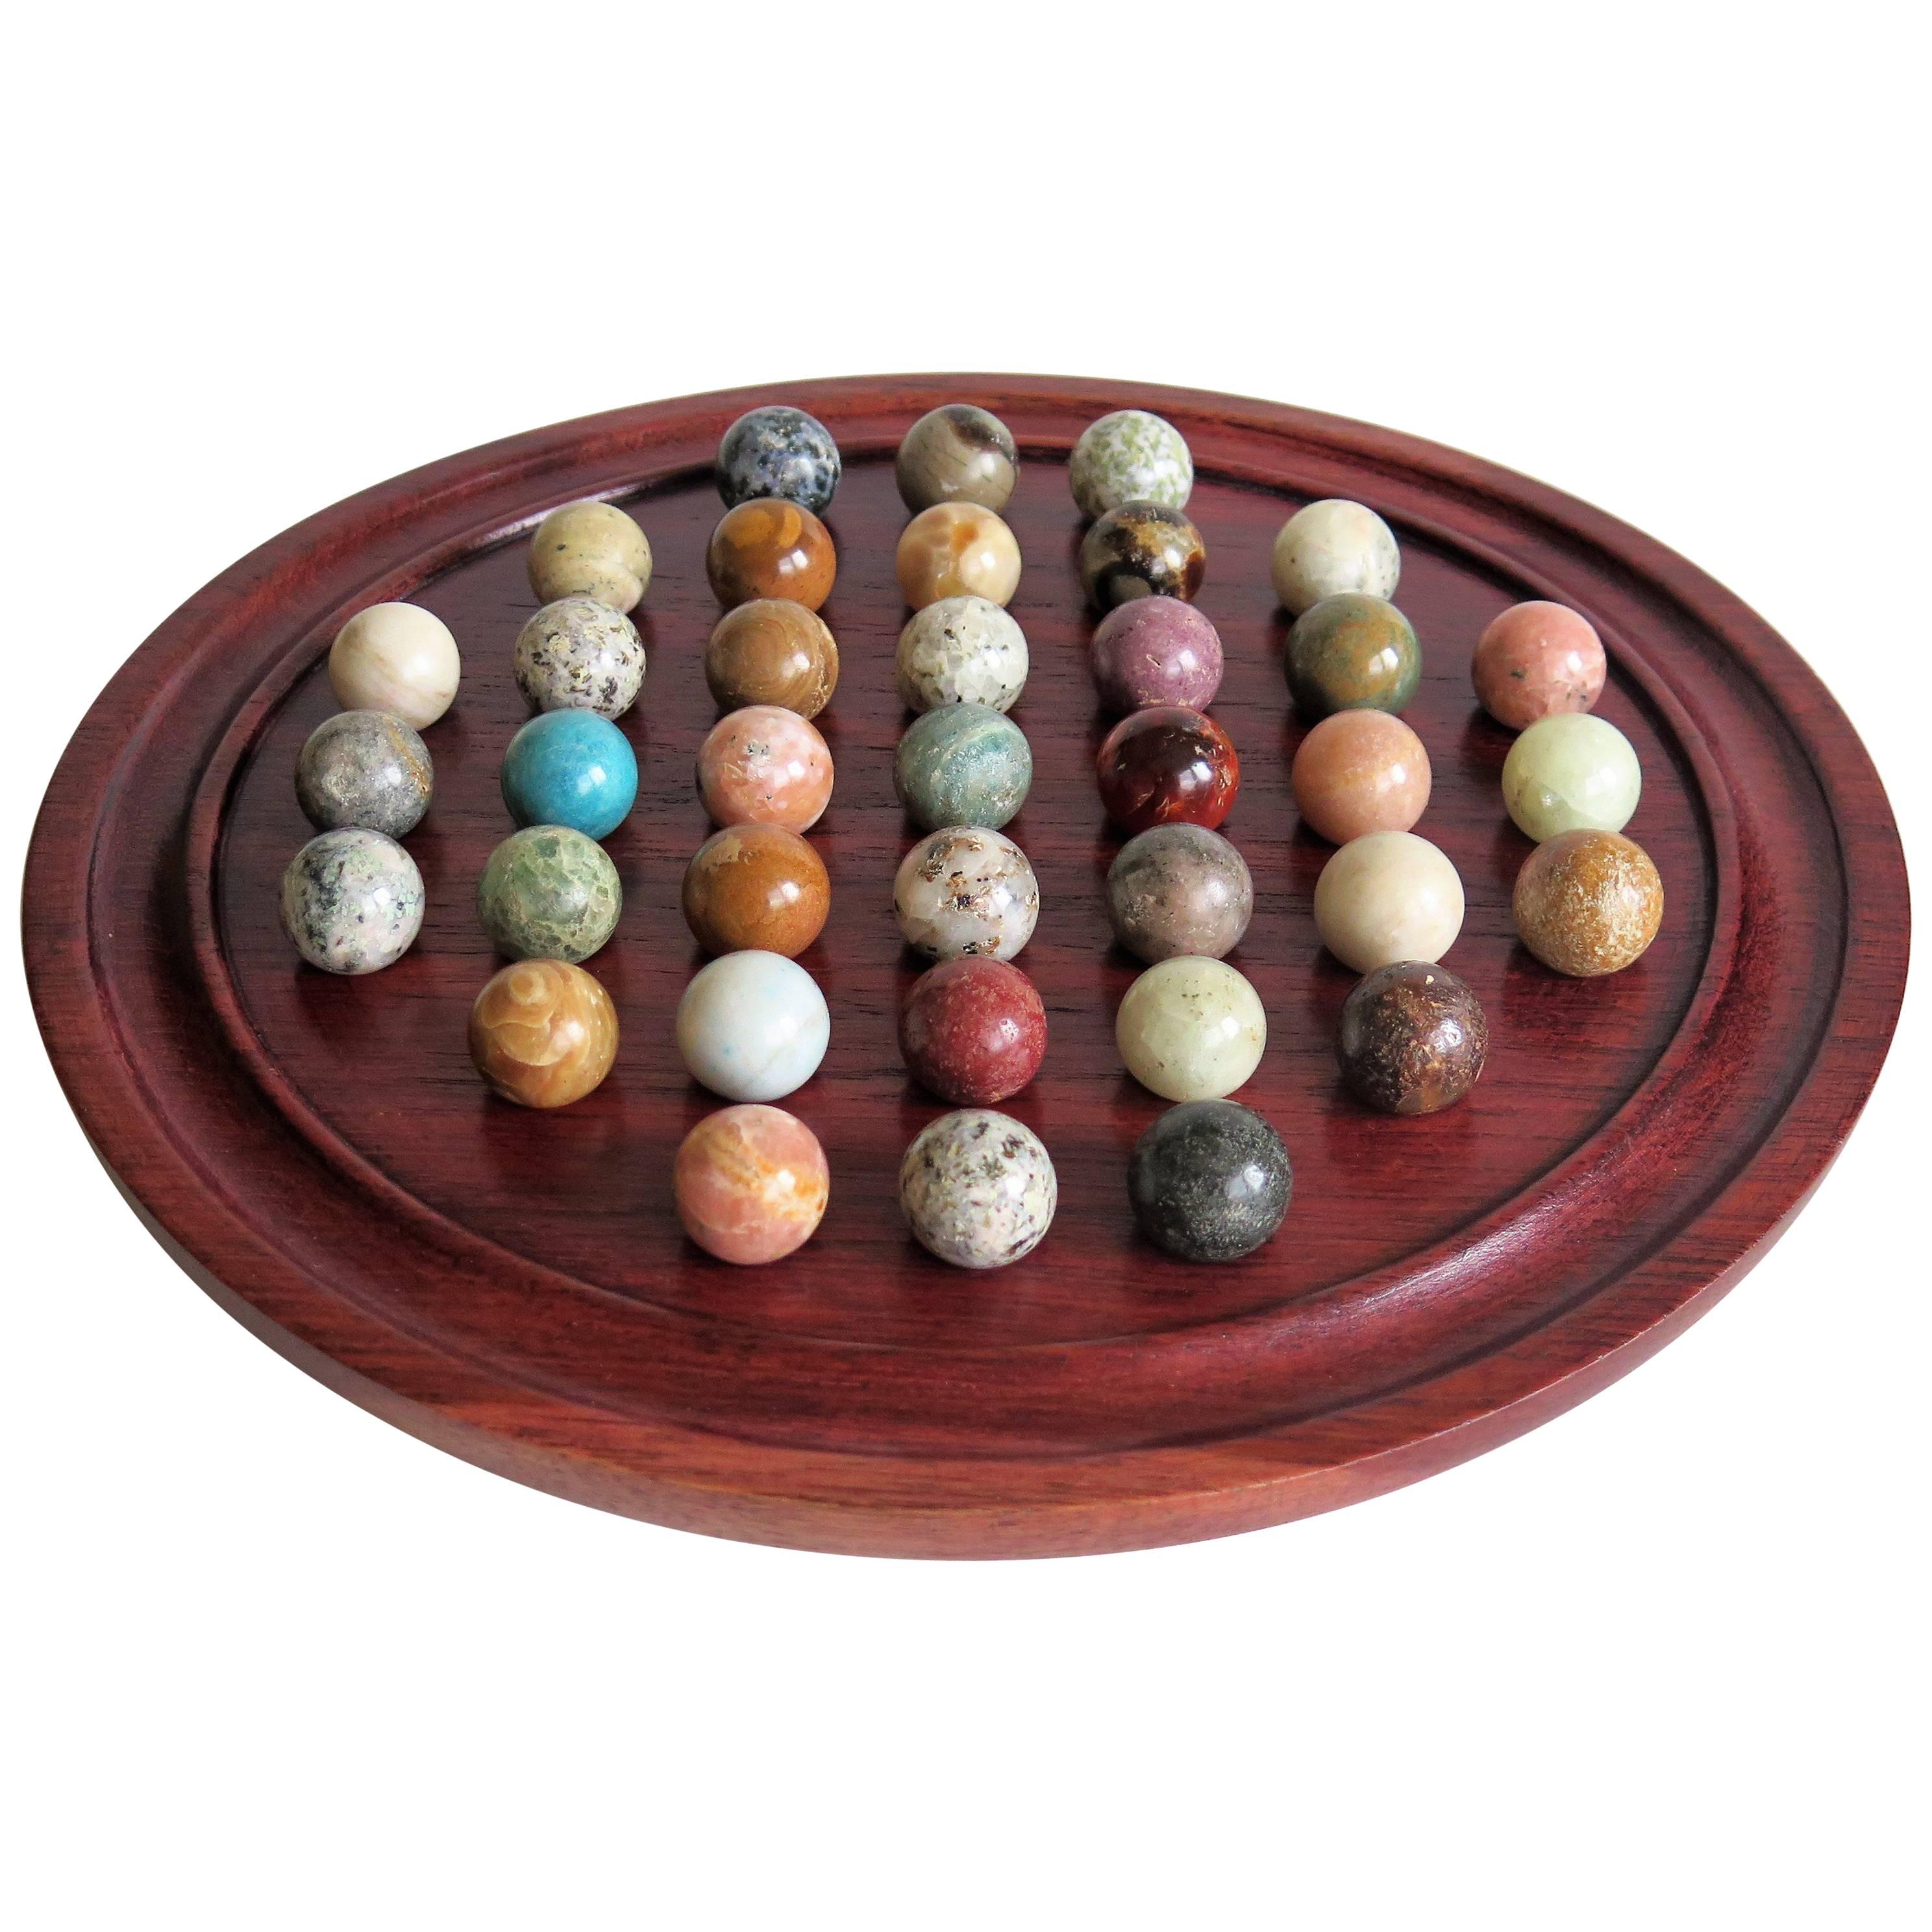 Edwardian Marble Solitaire Board Game with 37 Agate Stone Marbles, circa 1910